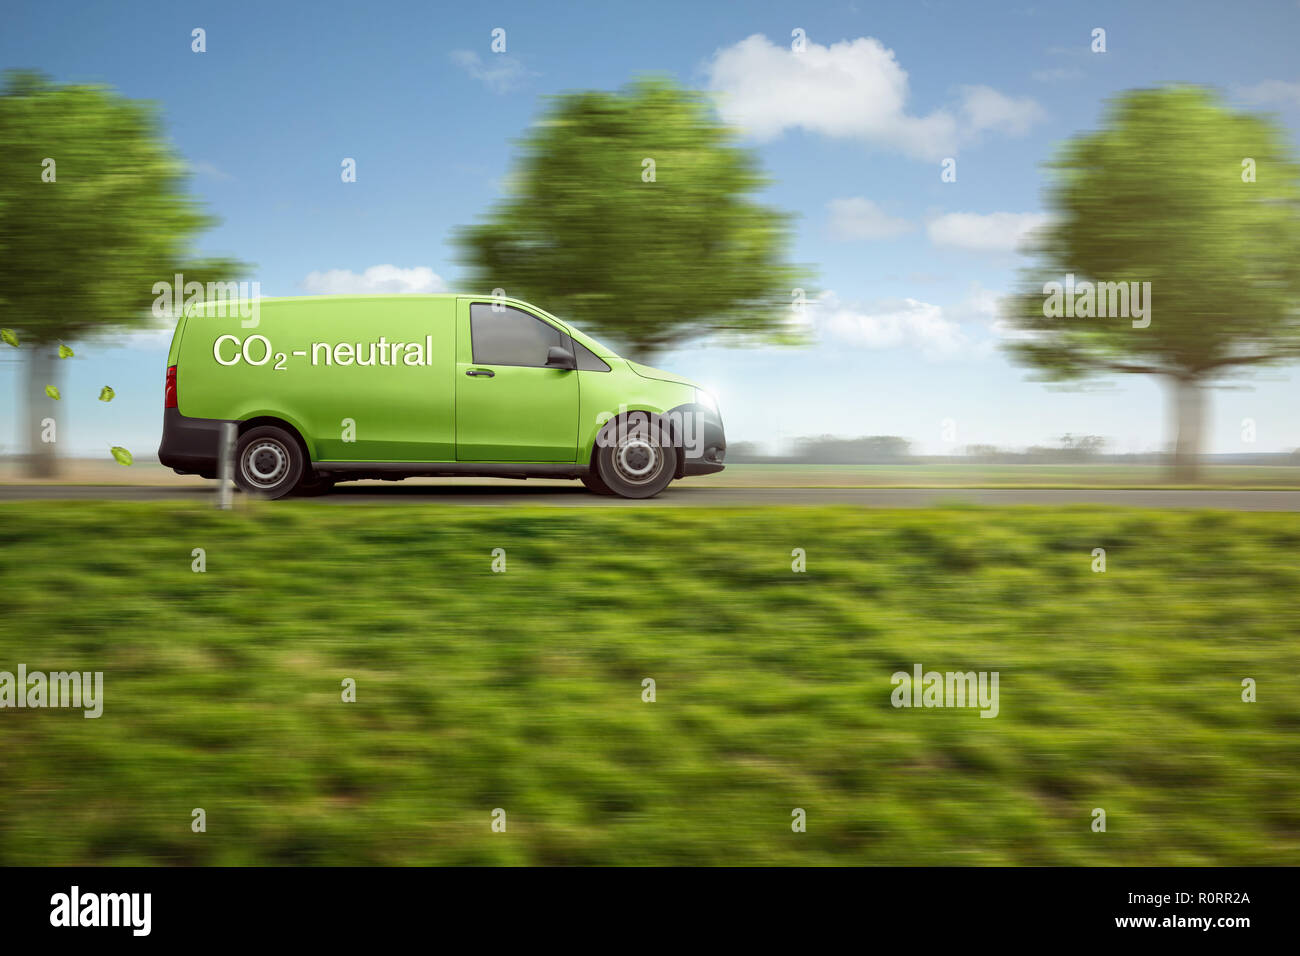 Carbon-neutral delivery with a green van driving on a country road with green trees Stock Photo